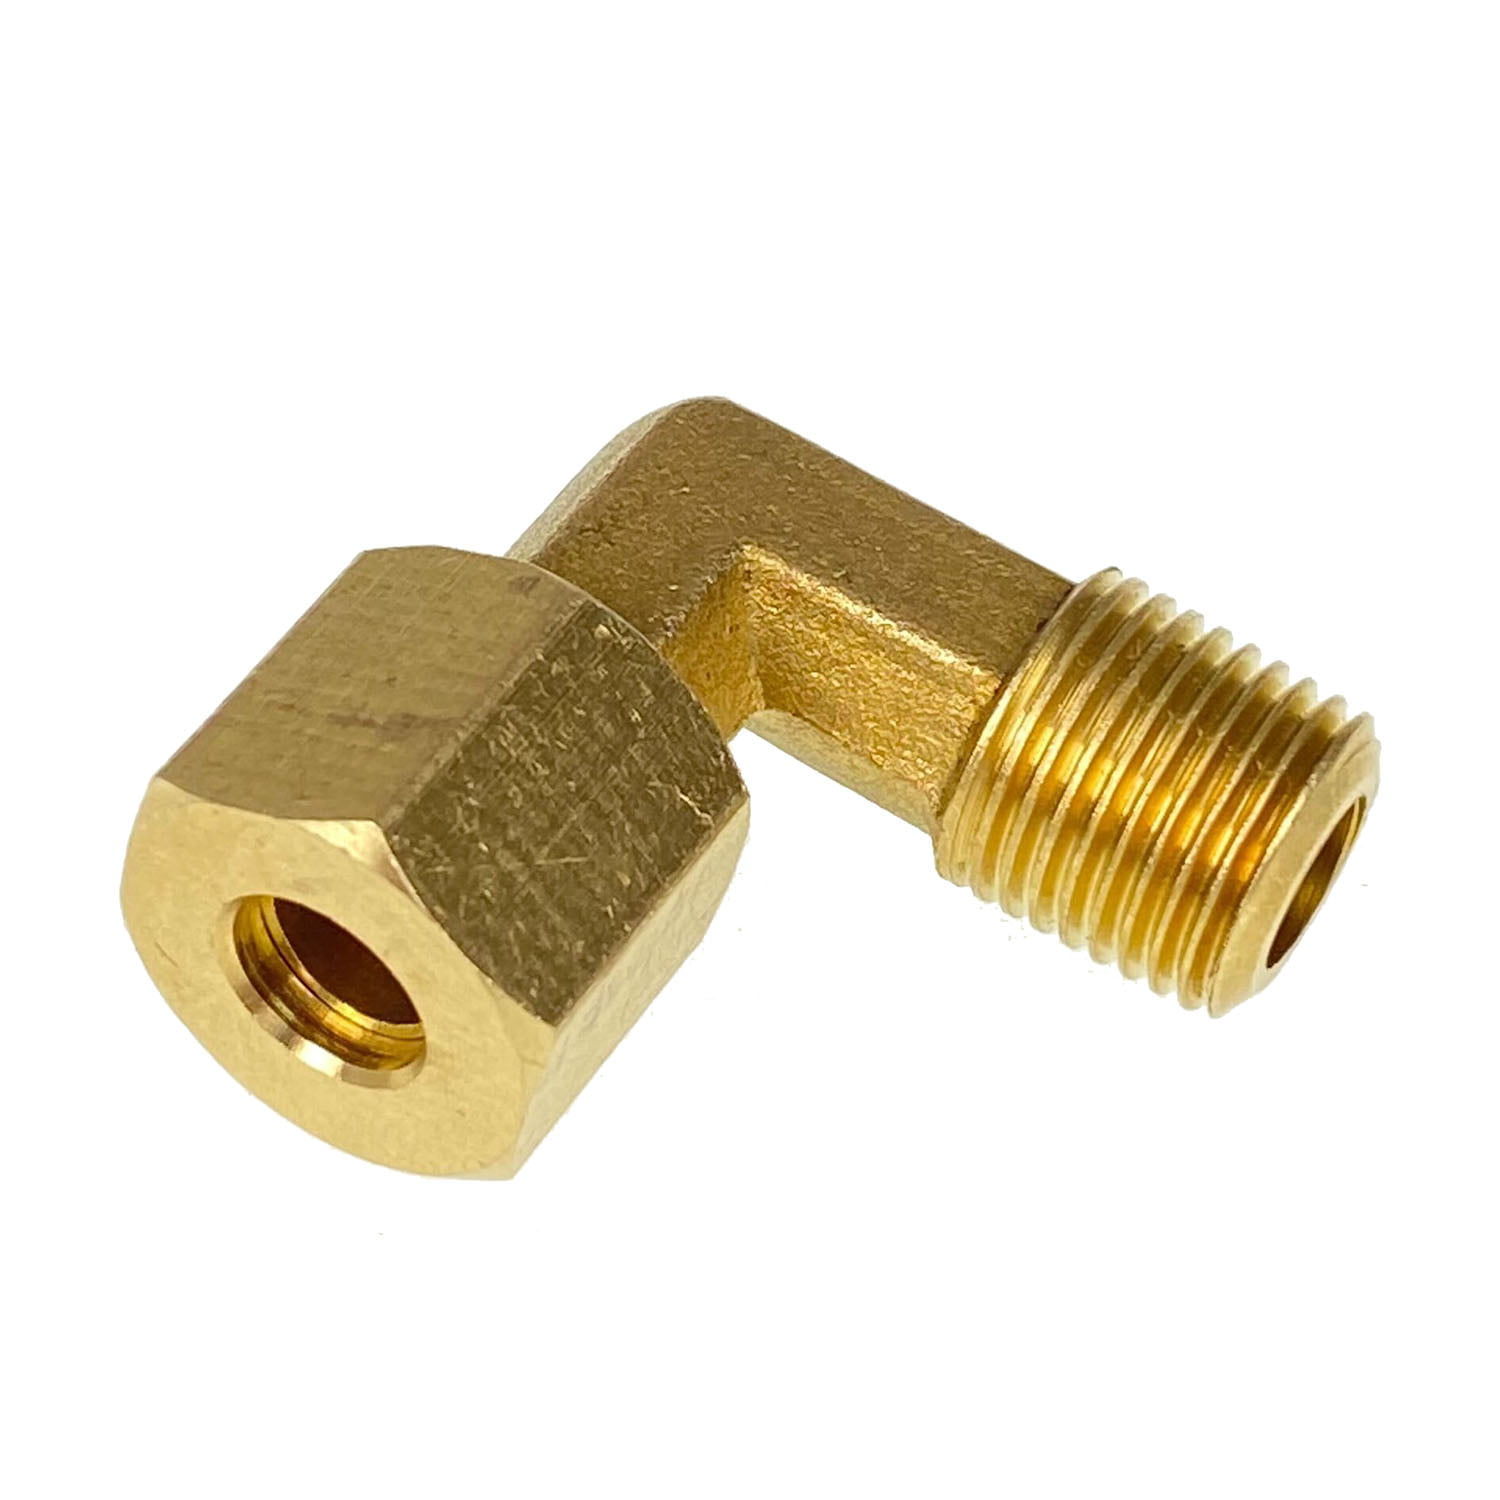 Generic Brass Pipe 1/8 Male x 1/8 Female NPT Adapter Fuel Gas Air pack of 5 